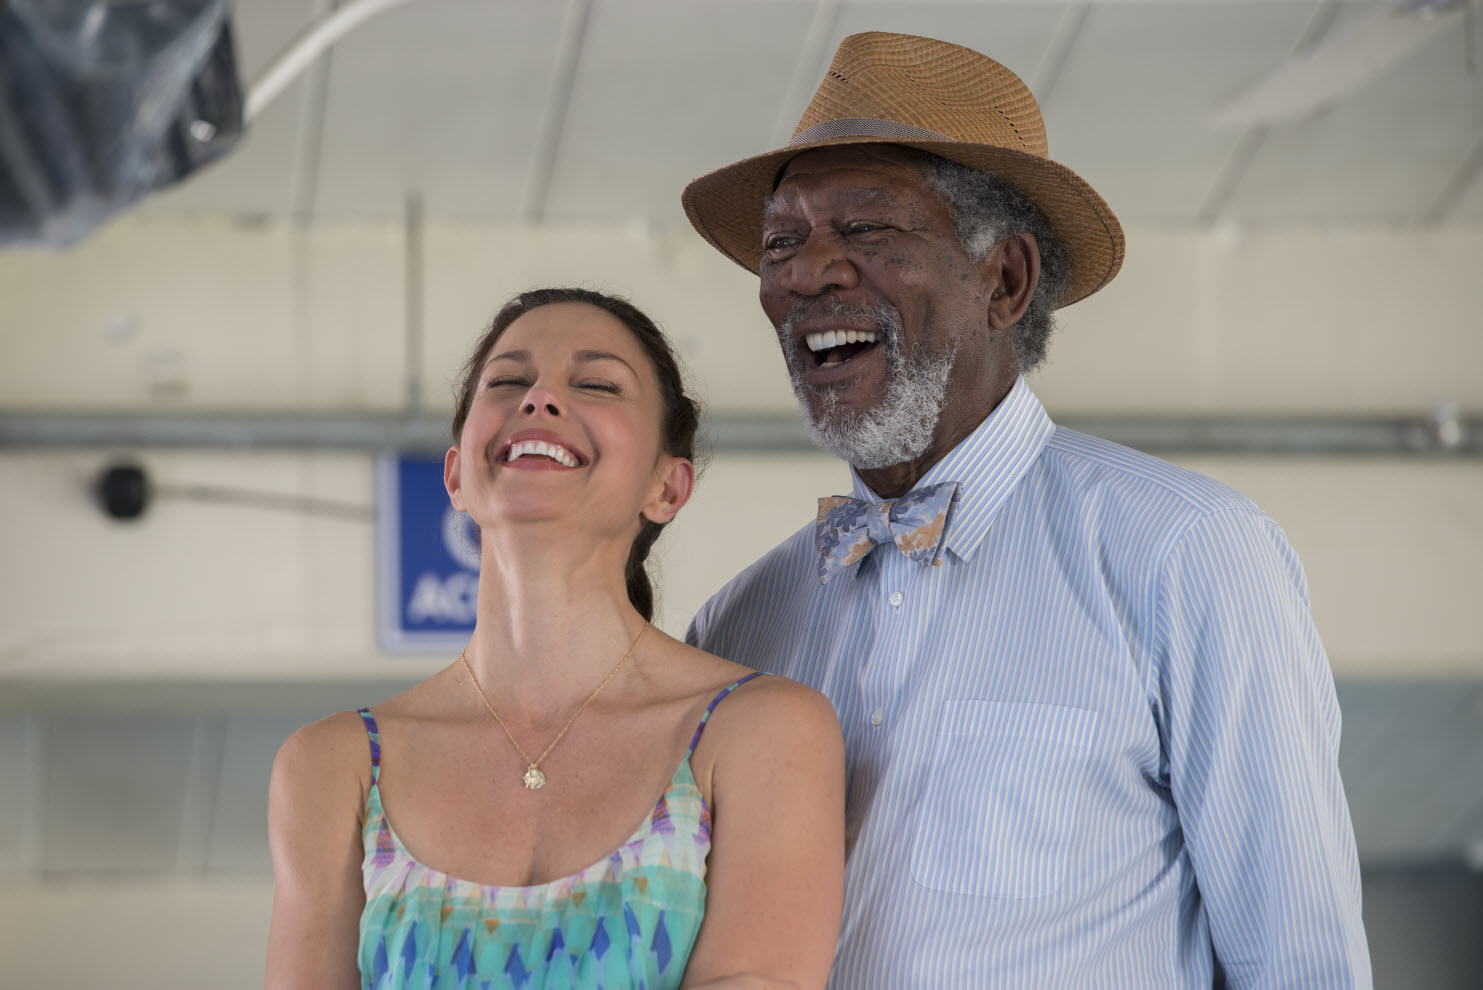 Ashely-Judd-and-Morgan-Freeman-in-Dolphin-Tale-2